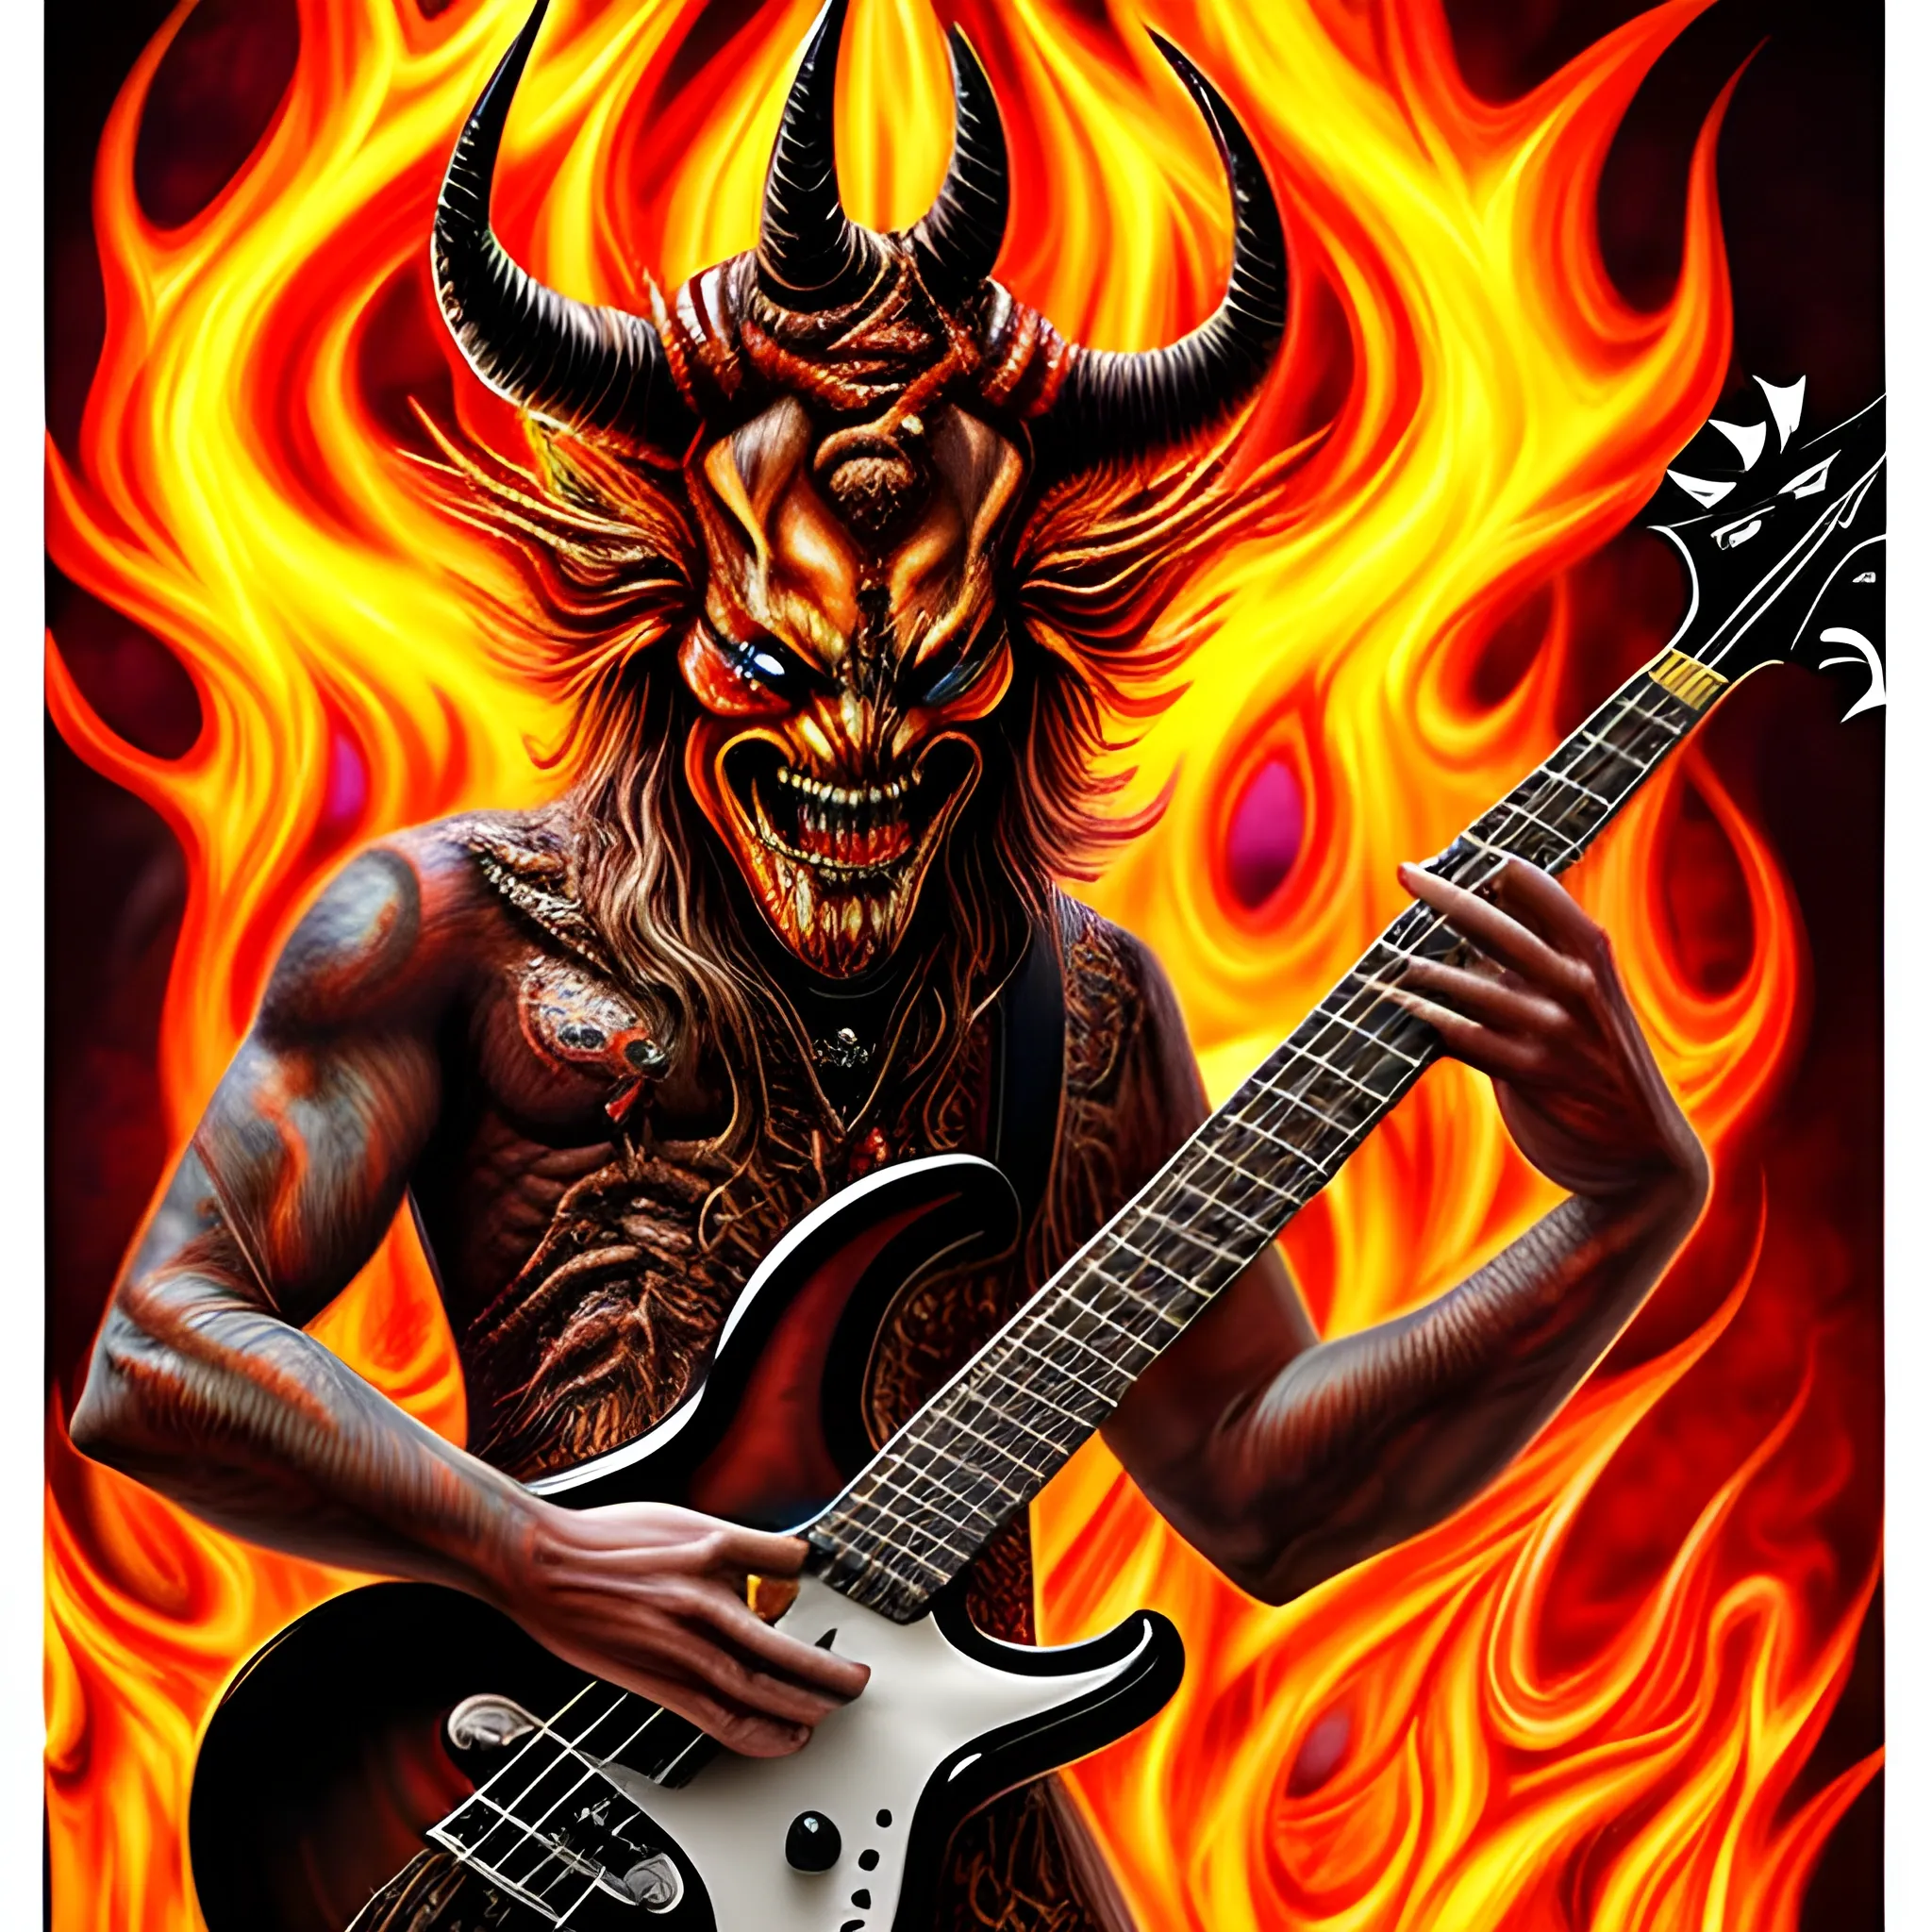 Look1, Trippy create a picture from this realistic full length image of the devil playing a five string electric bass on a stage with fire